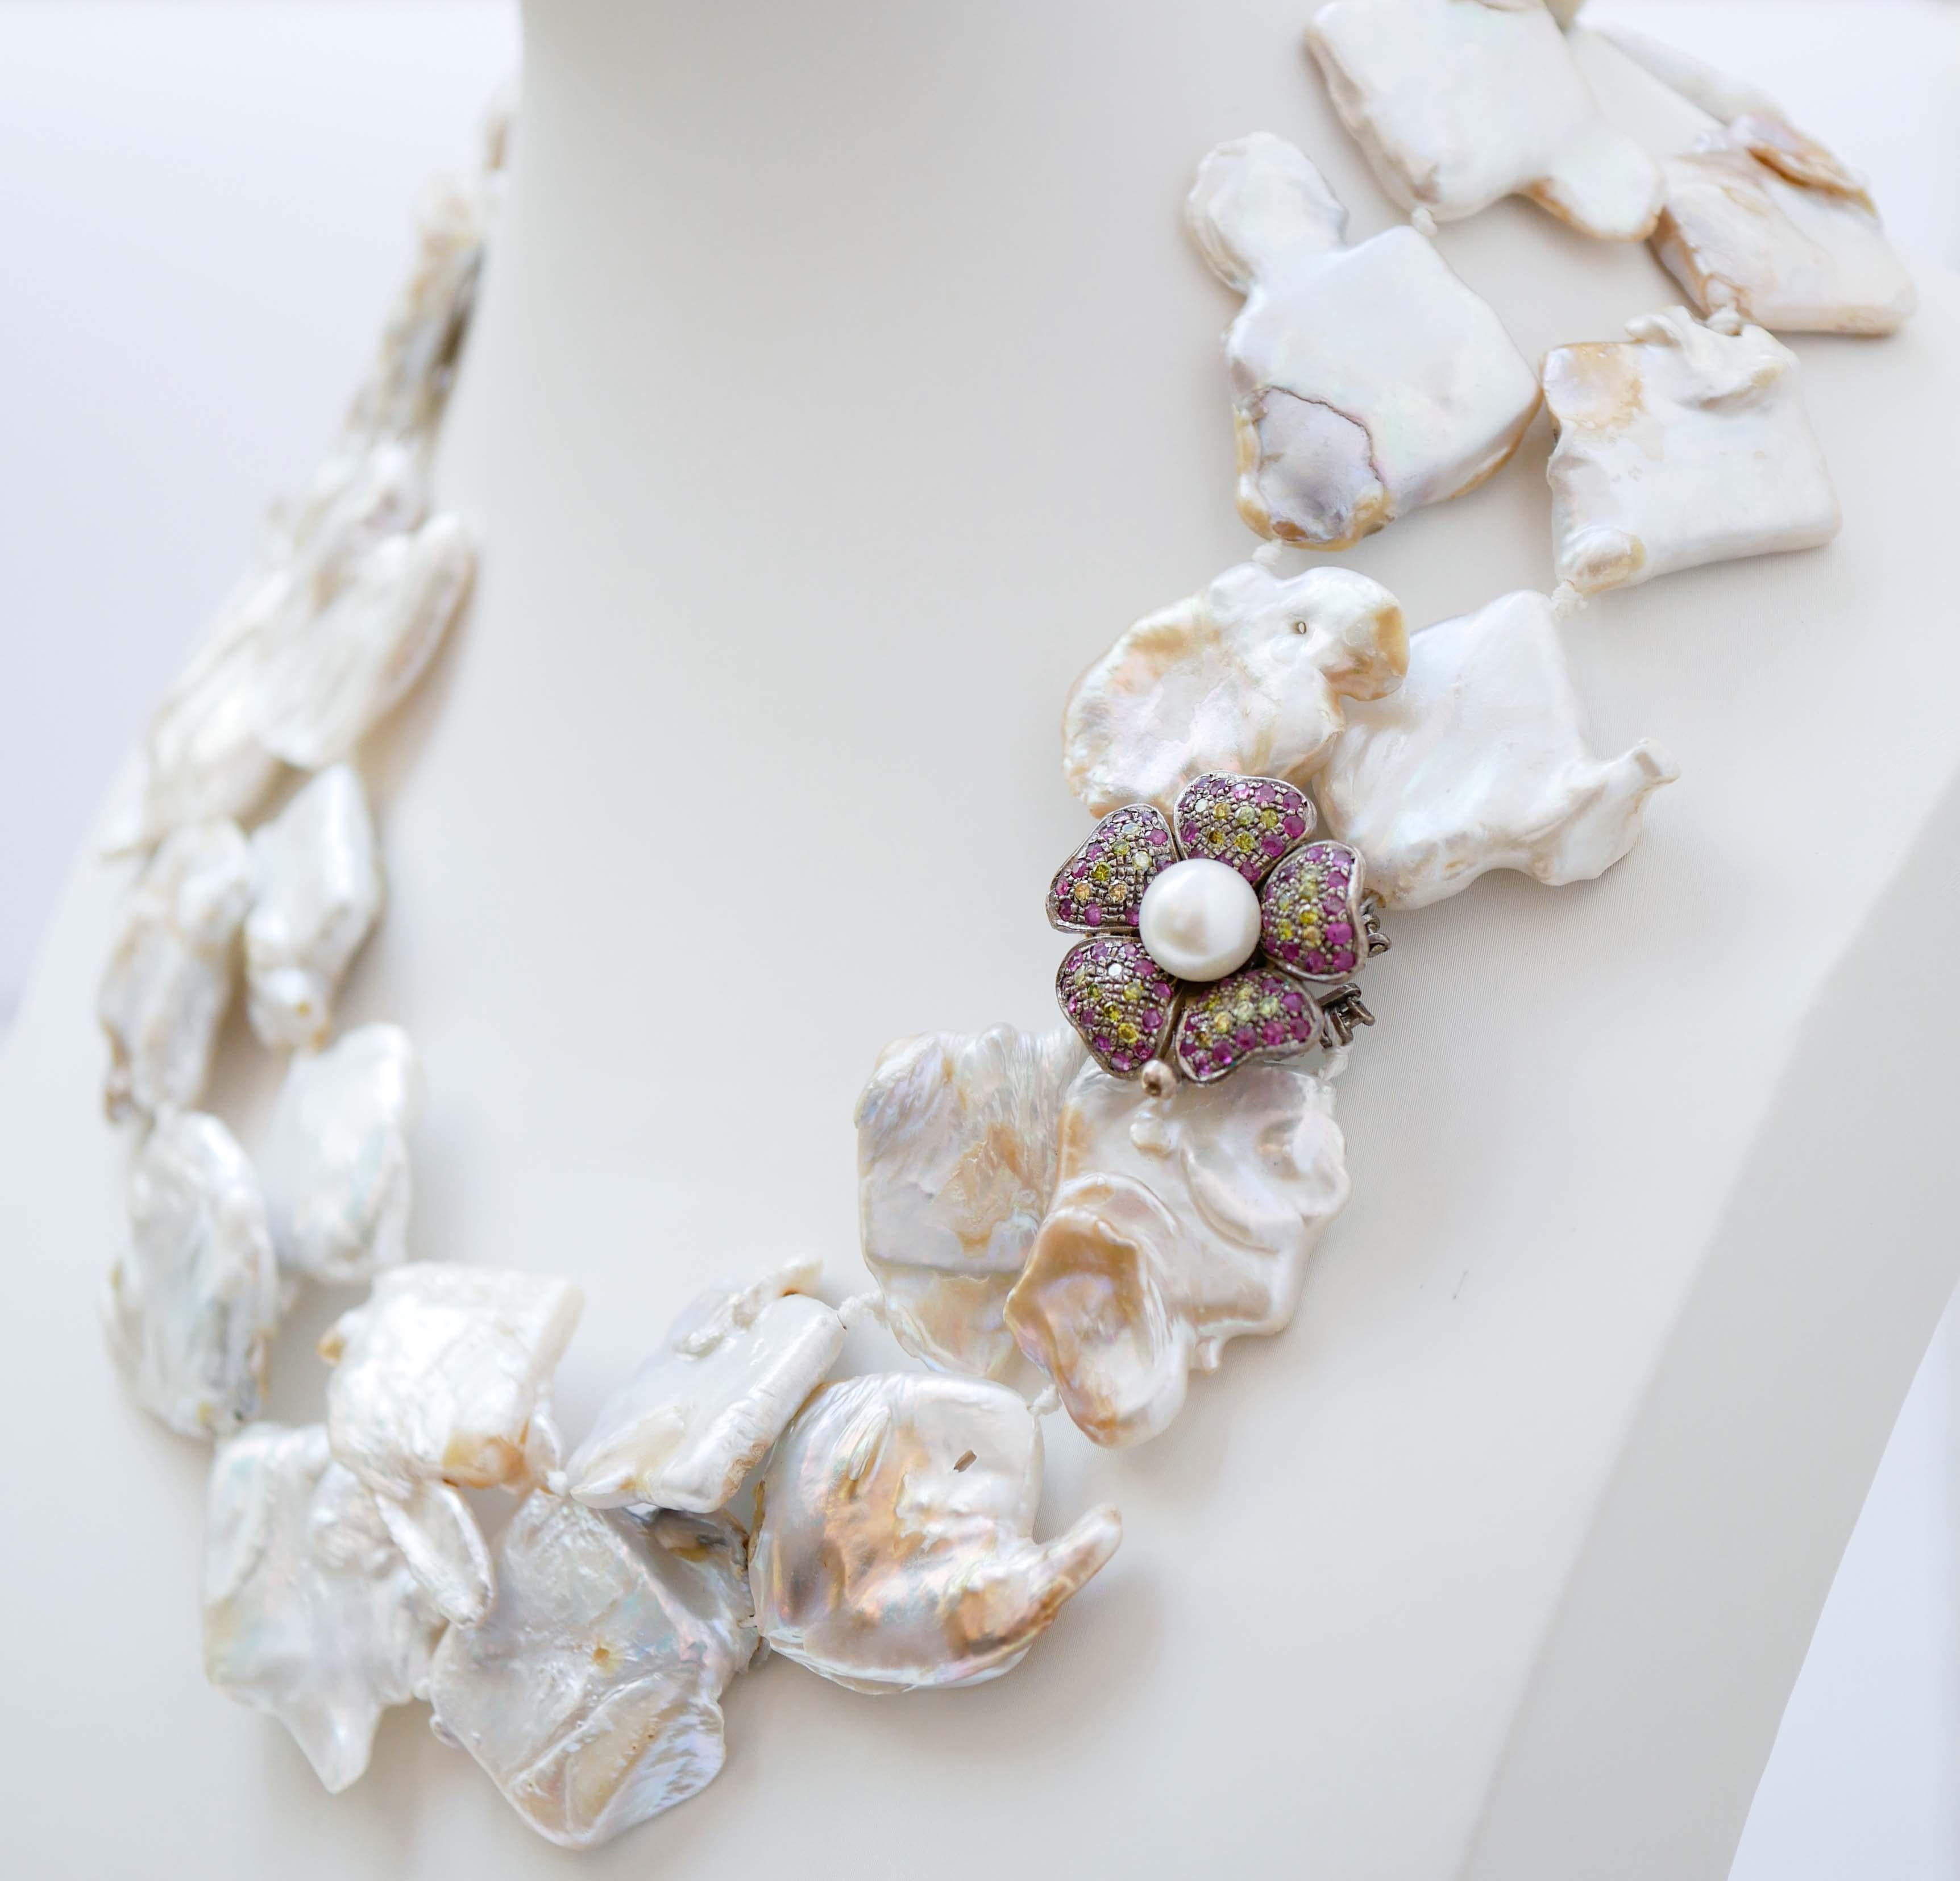 Retro Baroque Pearls, Rubies, Stones, Rose Gold and Silver Retrò Necklace